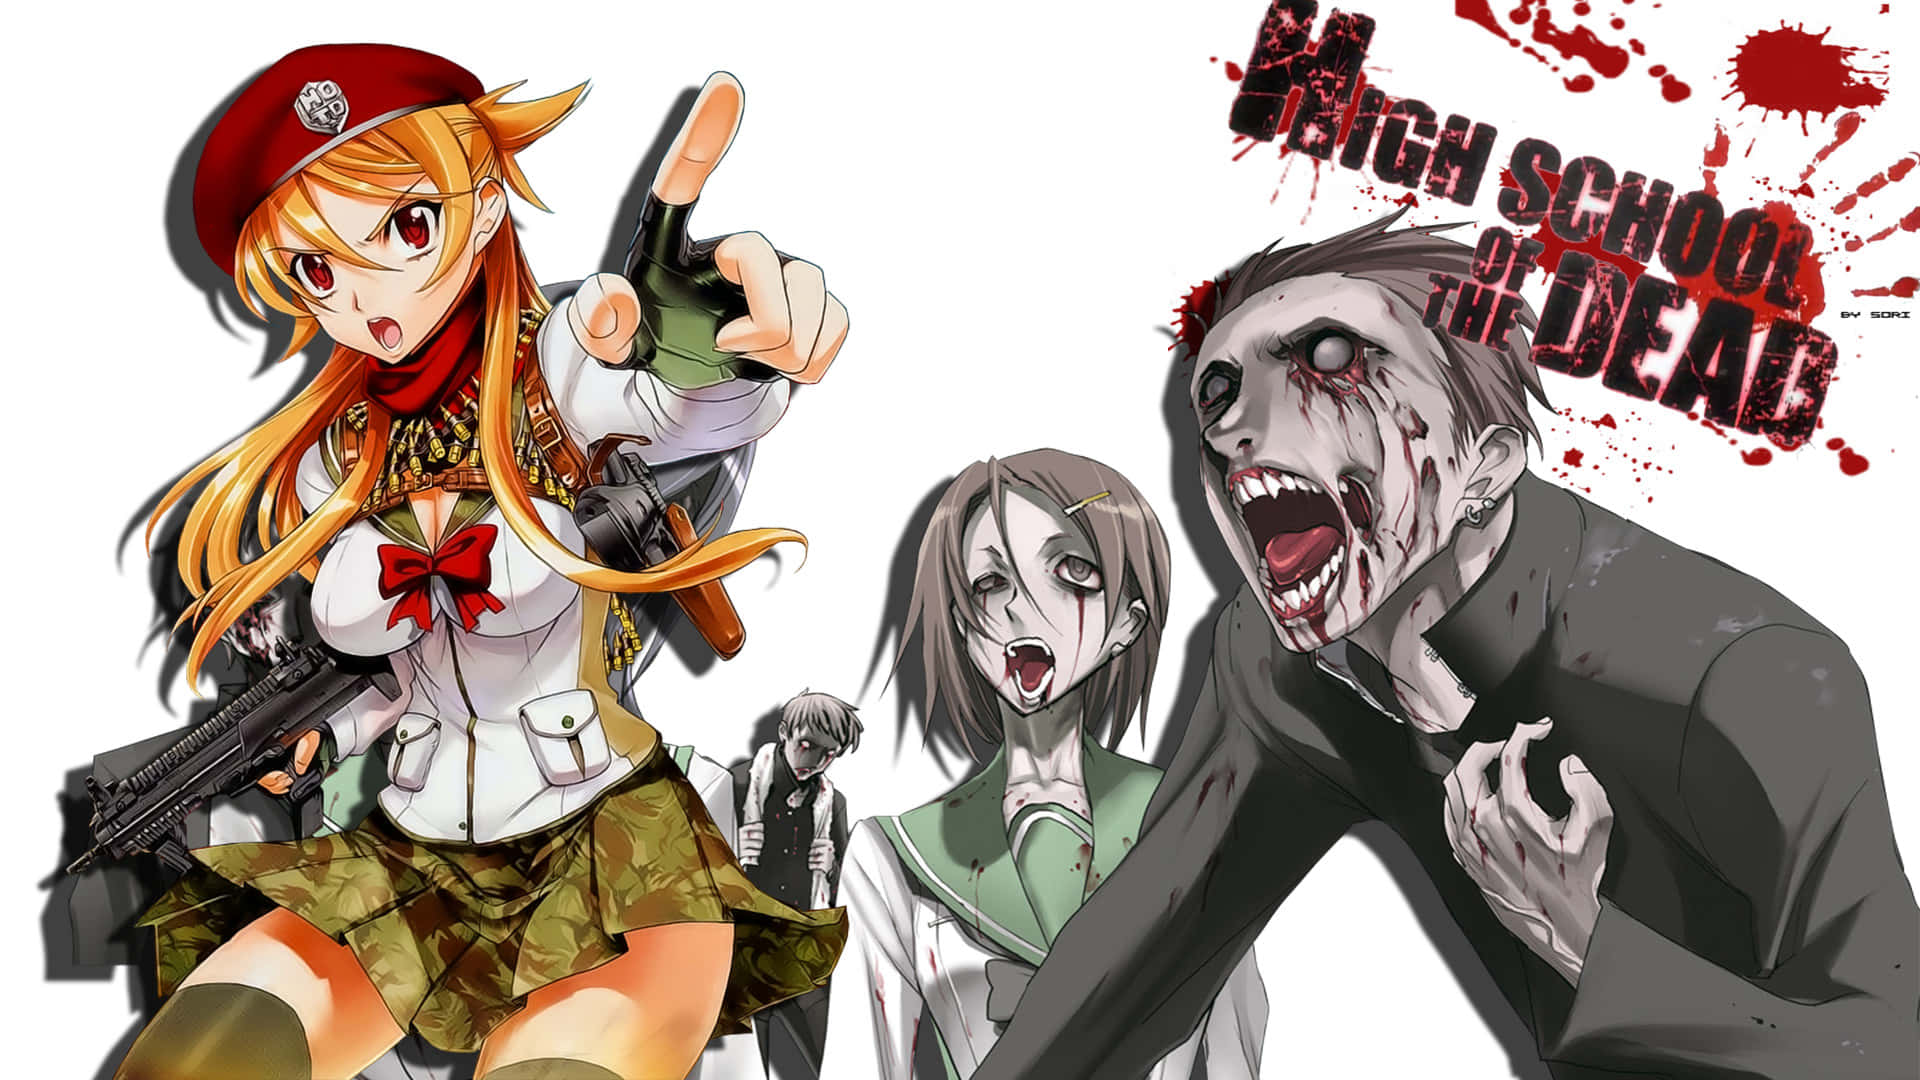 Surviving the zombie apocalypse with the Highschool Of The Dead gang.